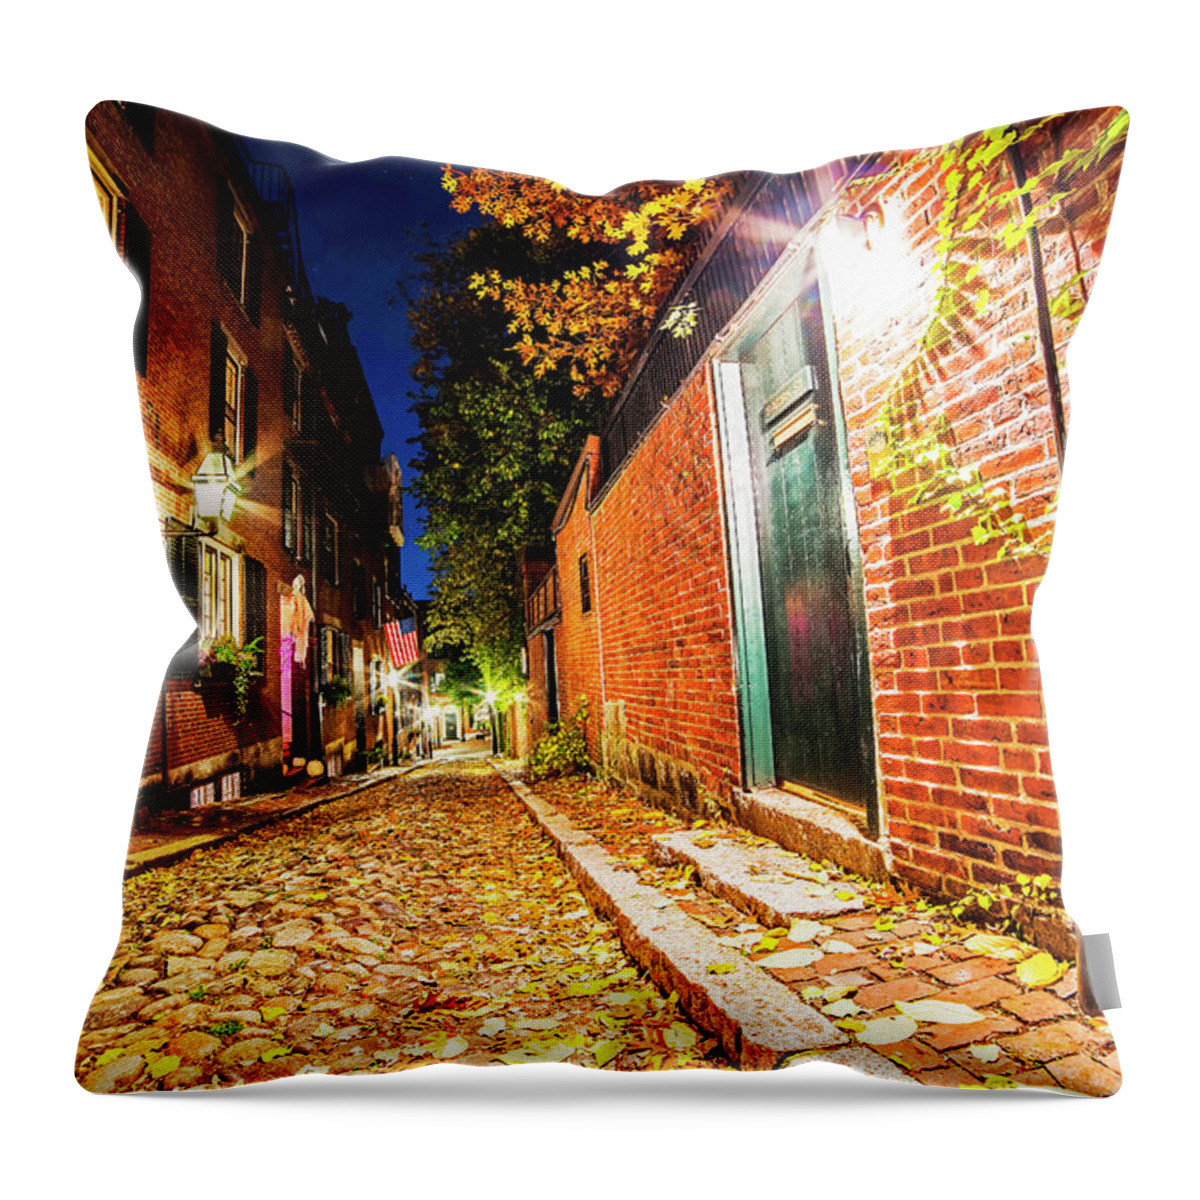 Boston Throw Pillow featuring the photograph Acorn Street Autumn Boston Mass by Toby McGuire